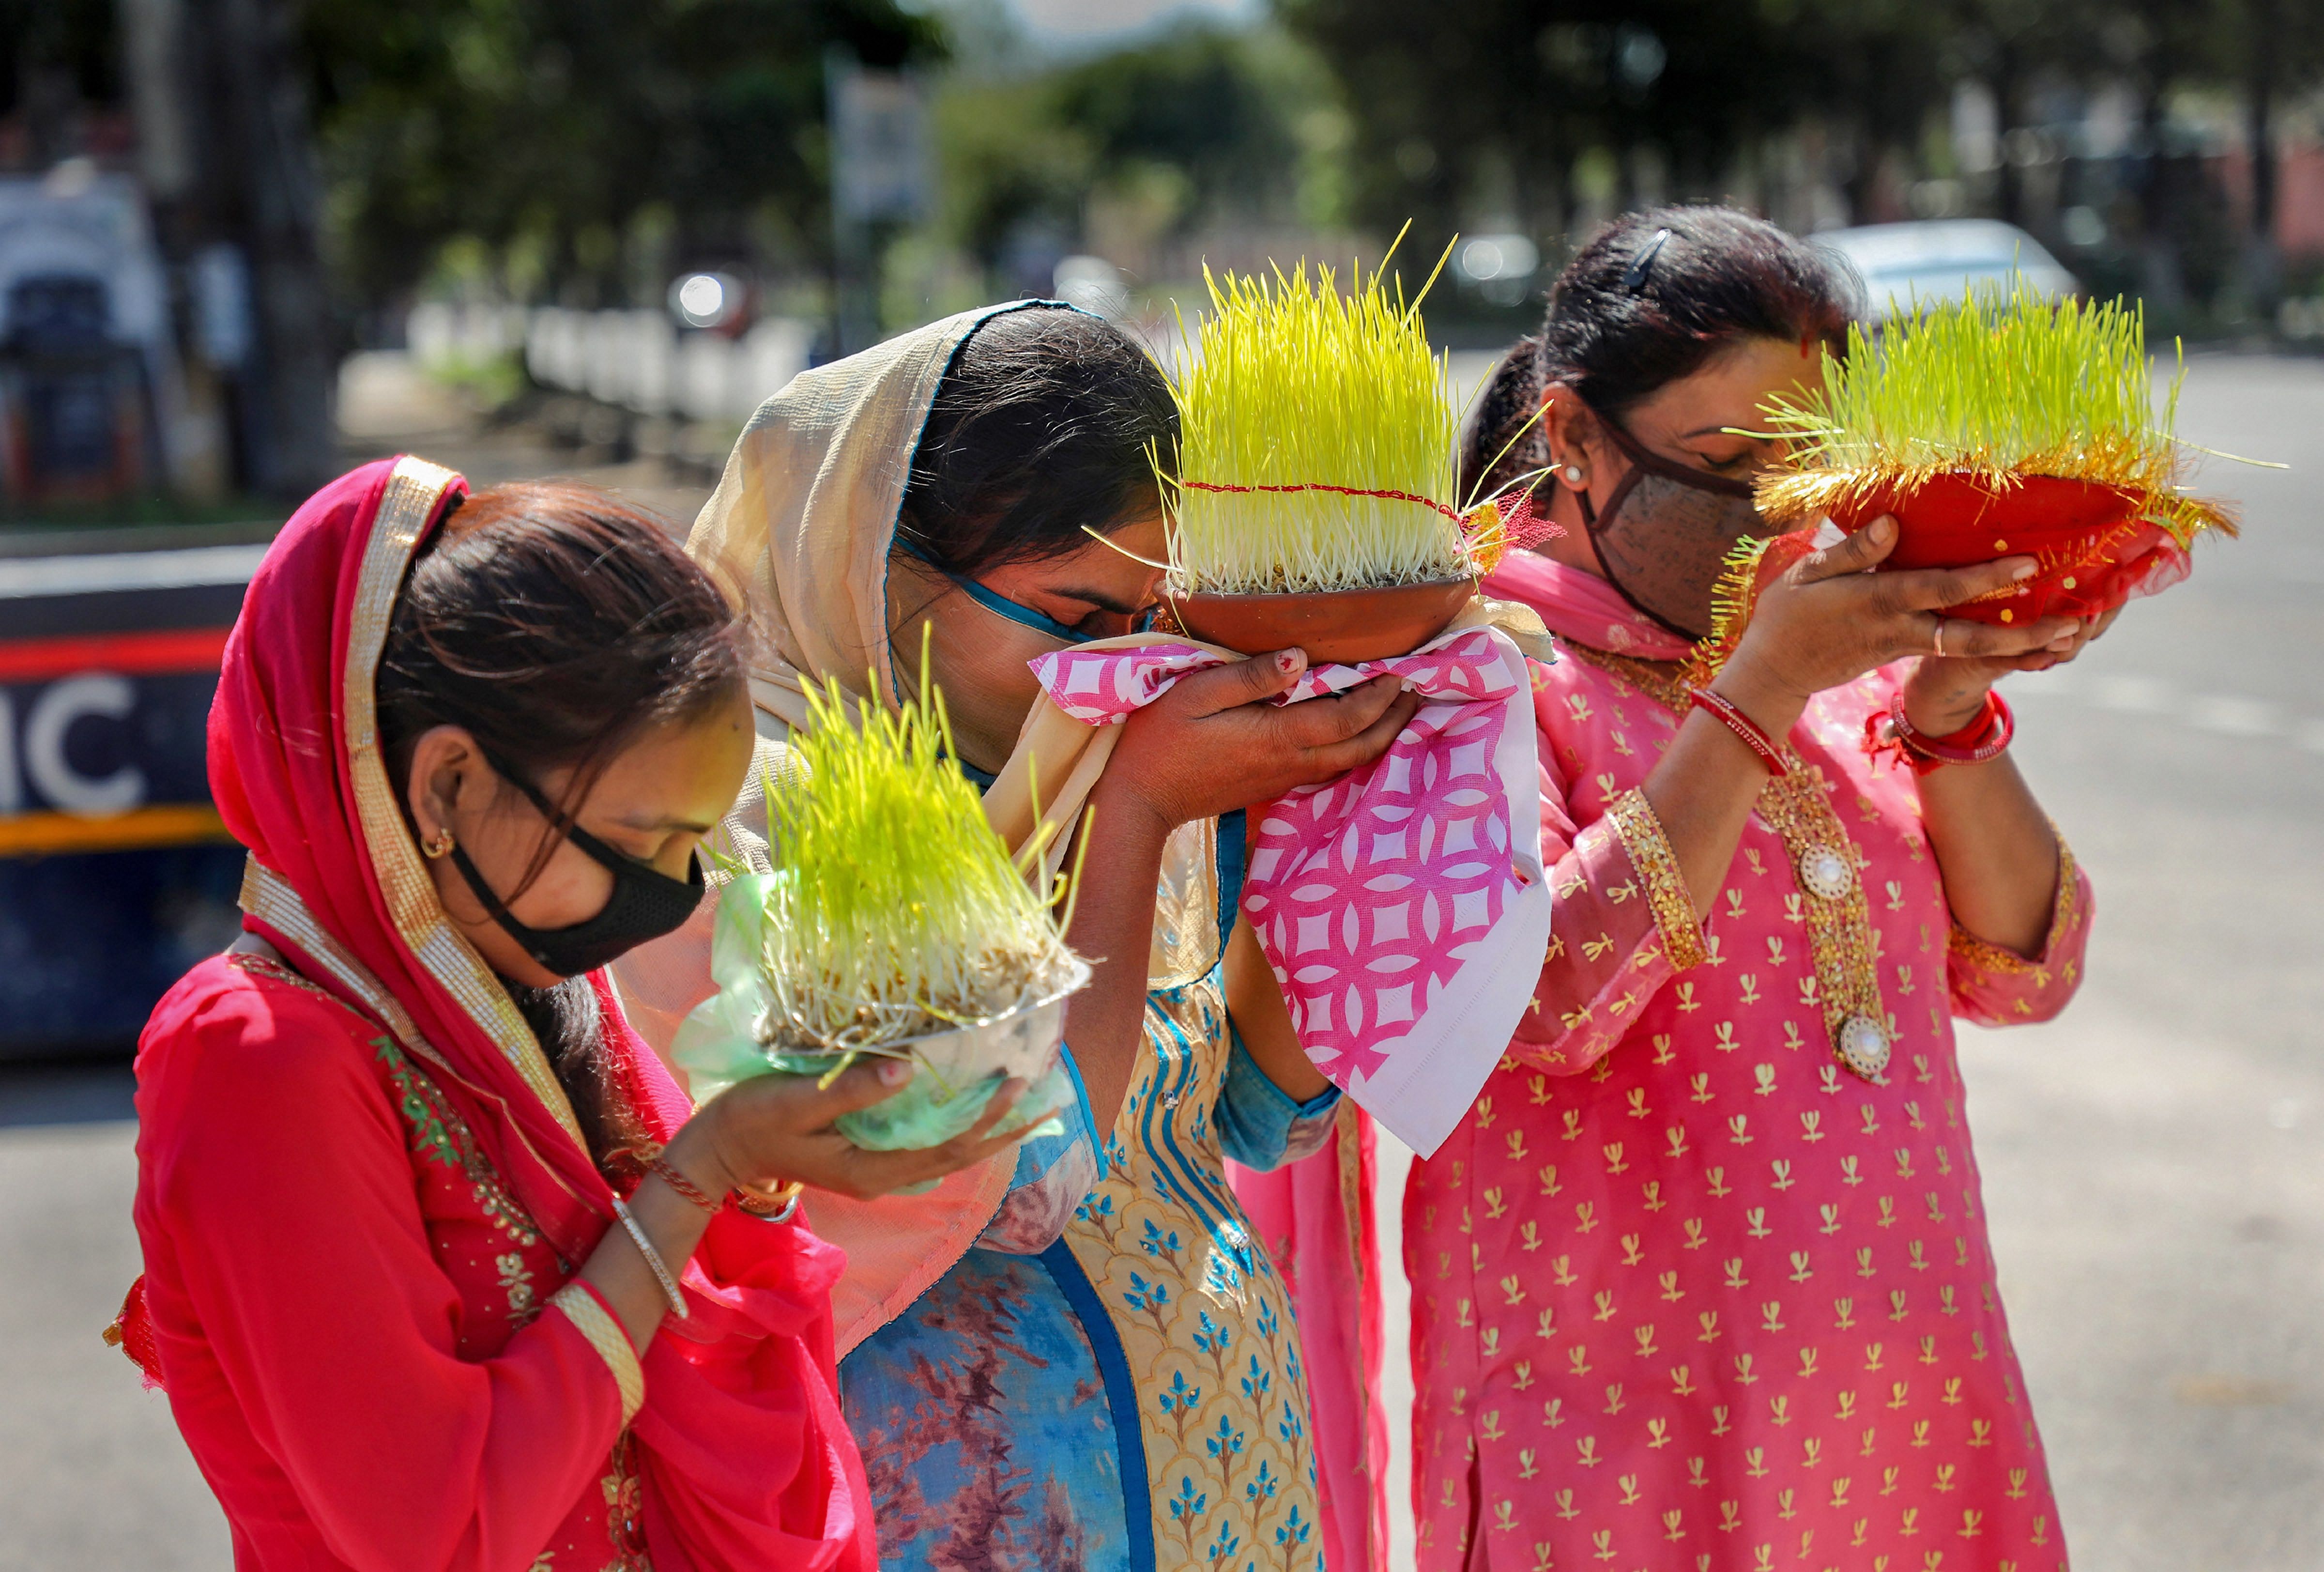 Devotees offer prayers while carrying 'Saakh', representing goddess Durga, on the occasion of Ashtami, during the nationwide lockdown in wake of coronavirus outbreak. (PTI Photo)